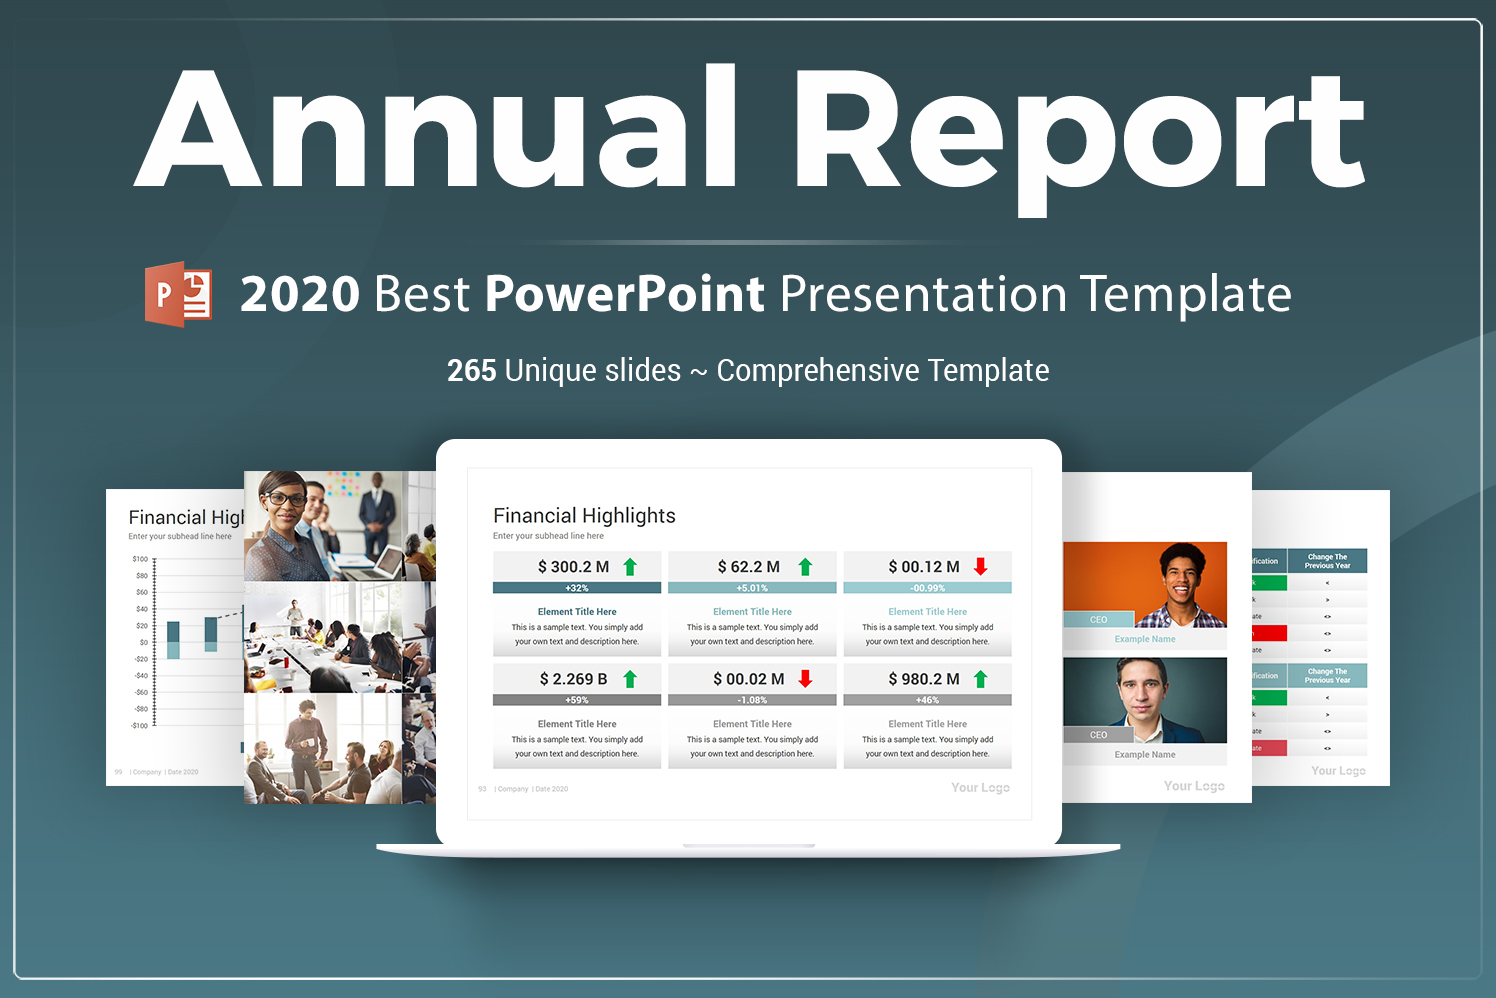 Annual Report PowerPoint Template. Buy for 15. ID 104619